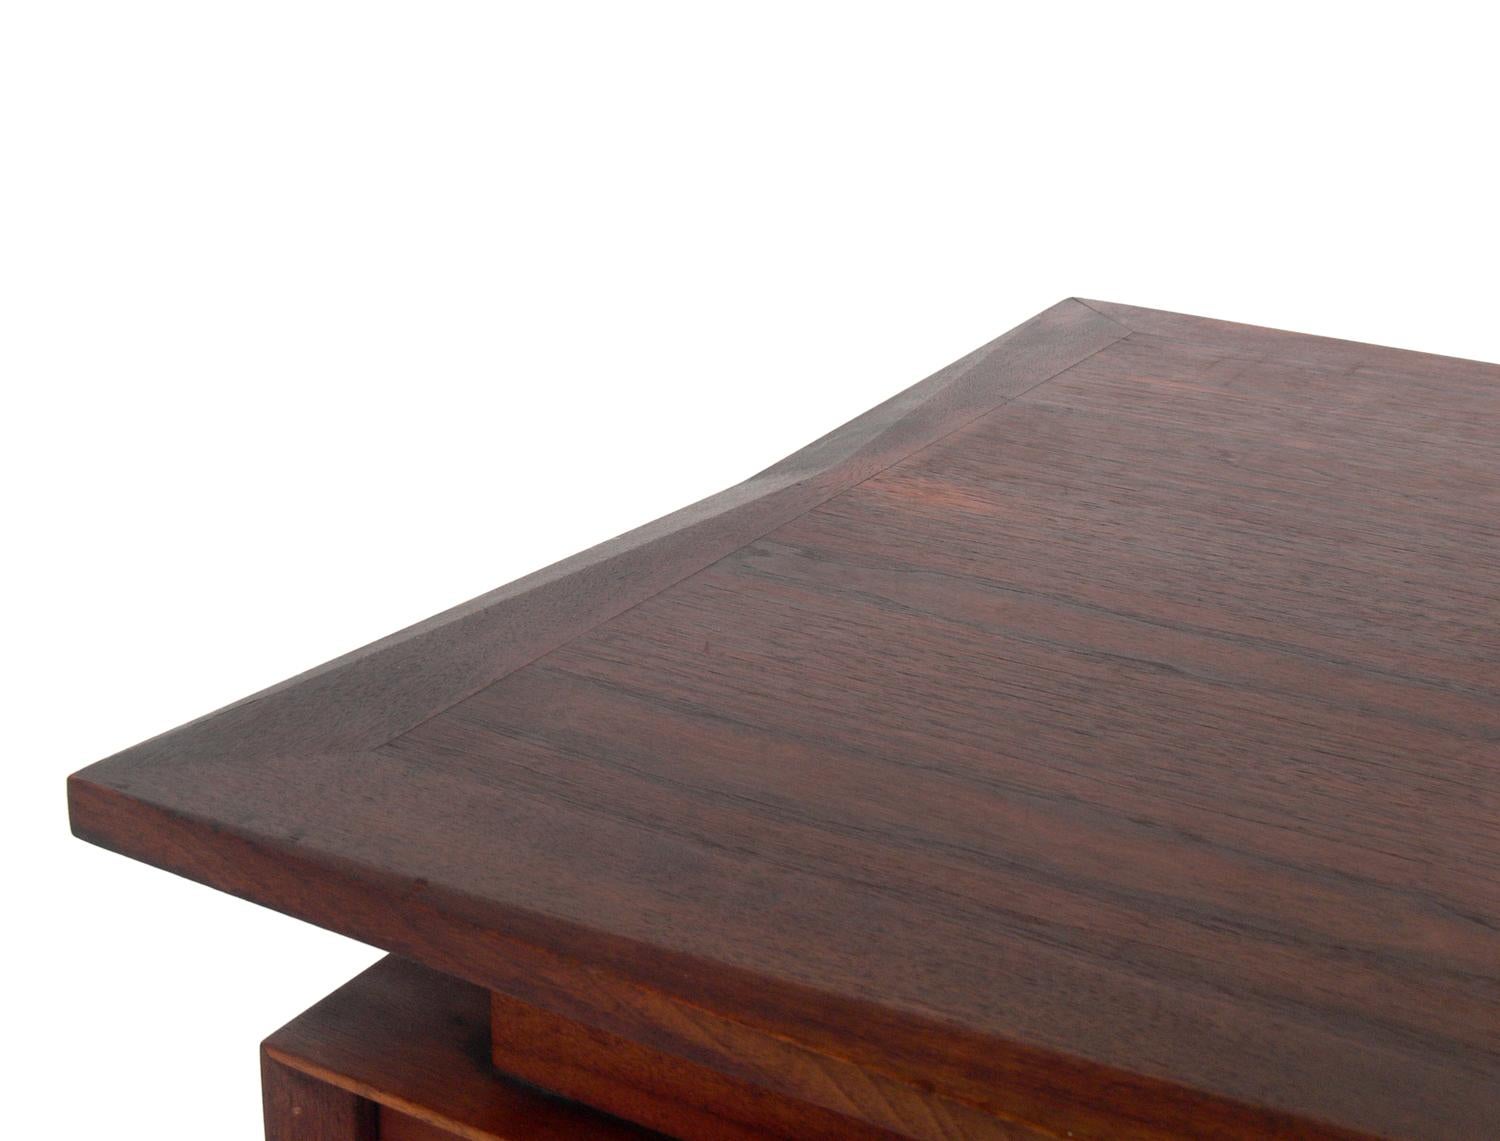 American Midcentury Walnut Desk and Chair by Marc Berge for Grosfeld House